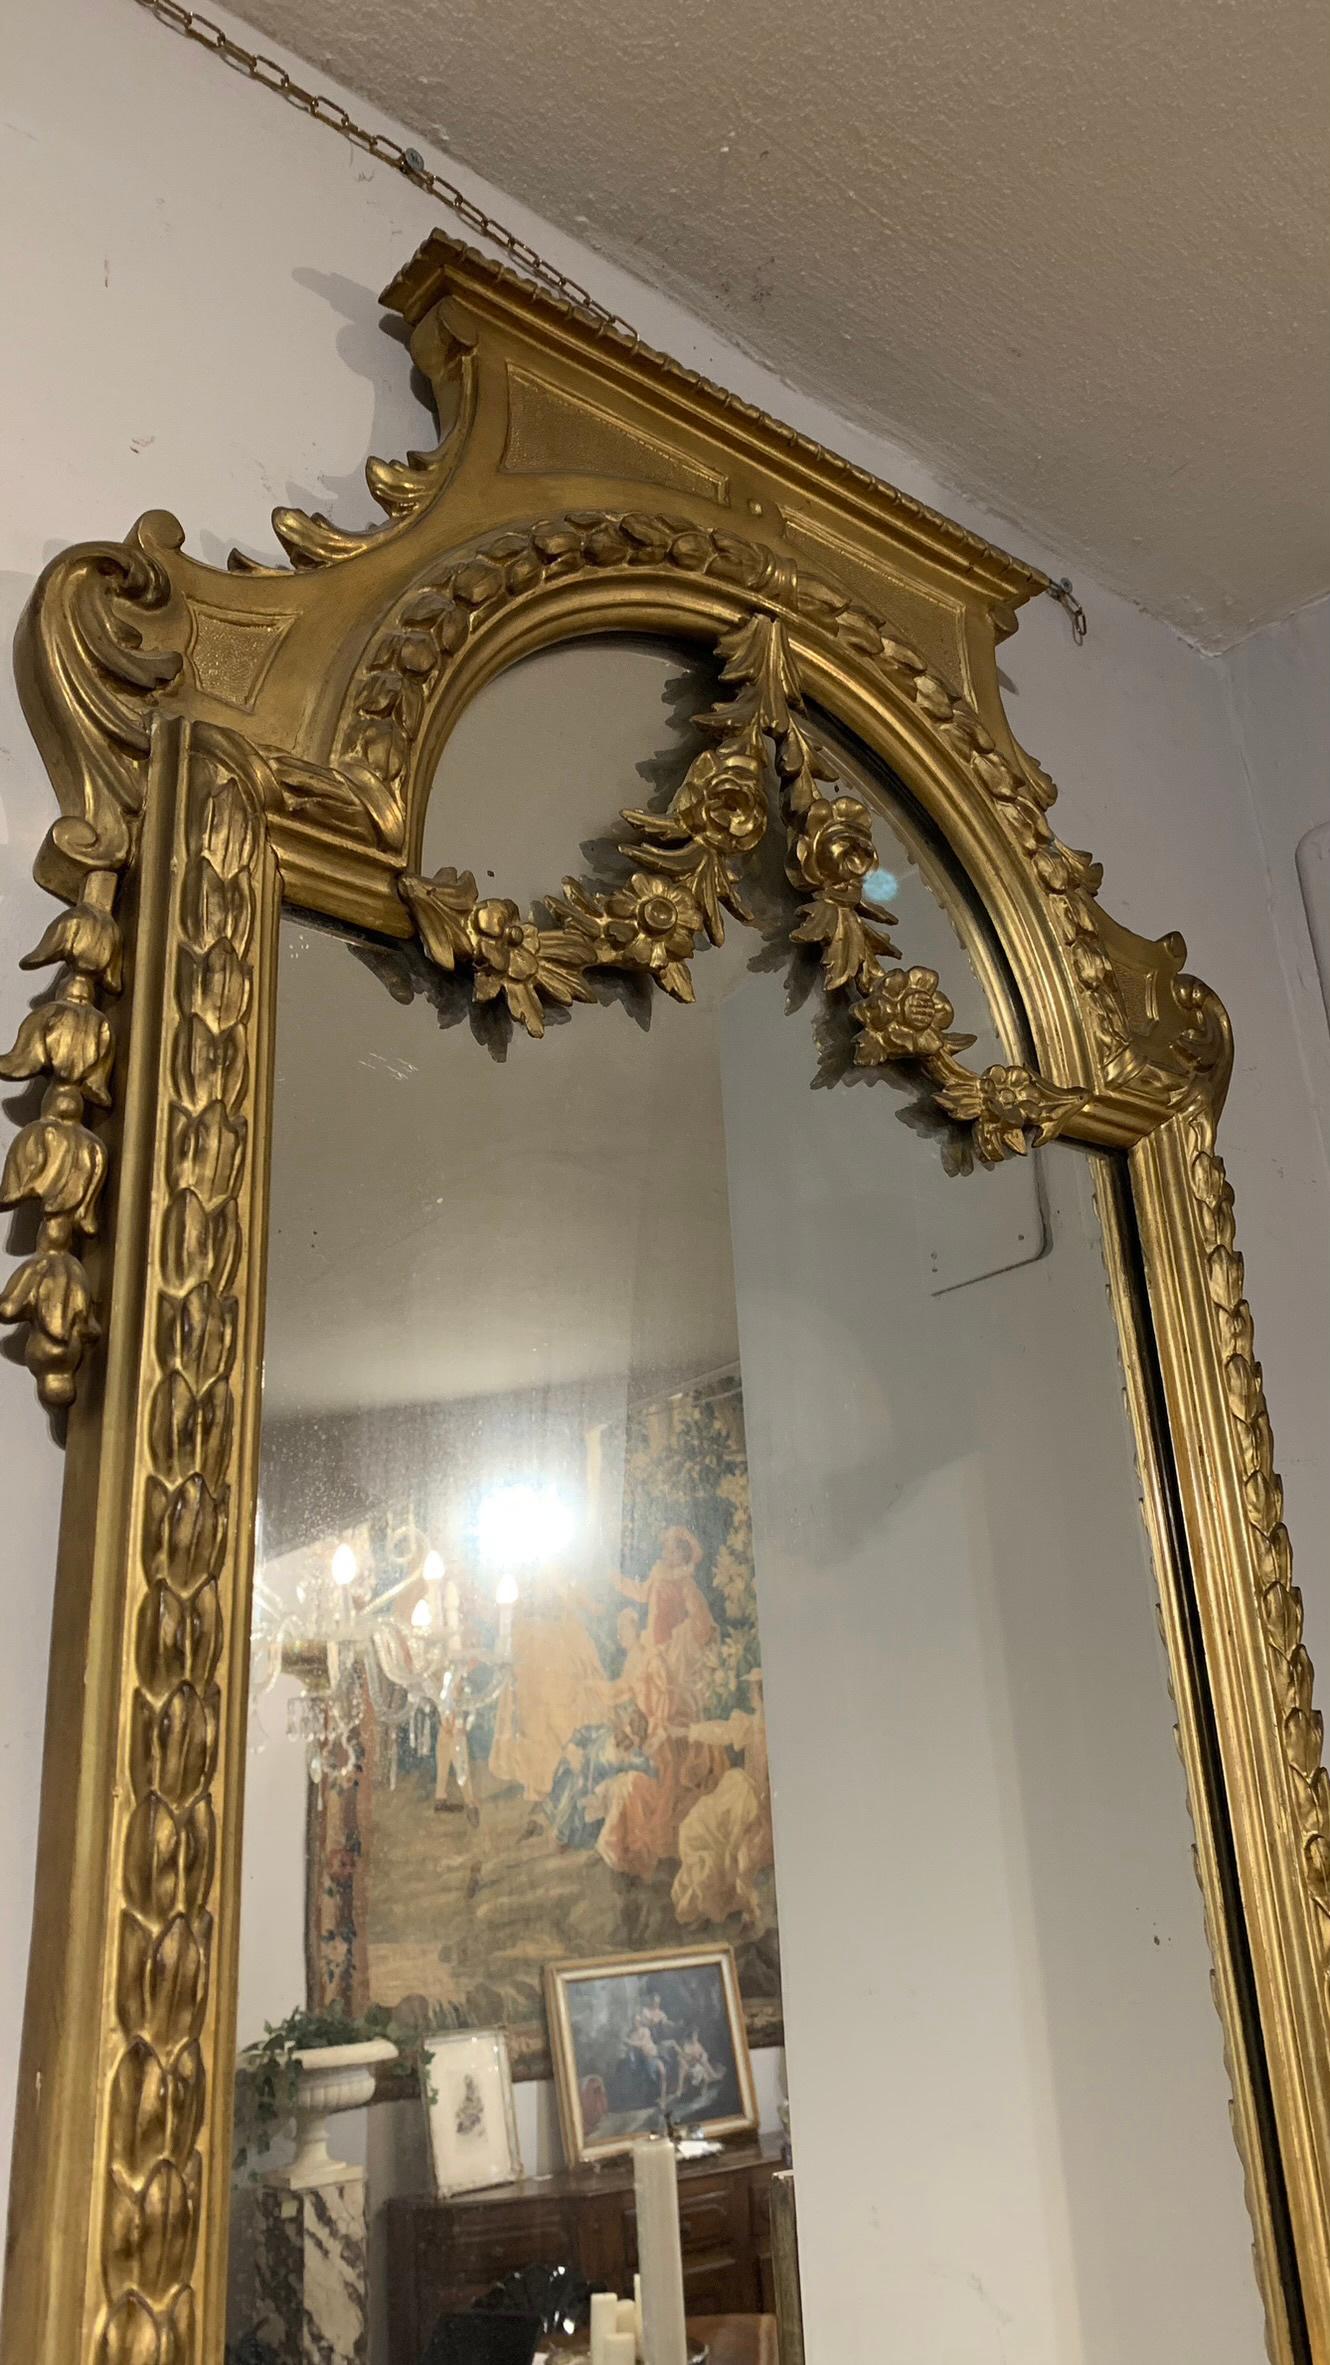 Neoclassical Revival 19th CENTURY PAIR OF TUSCAN MIRRORS IN NEOCLASSIC STYLE For Sale